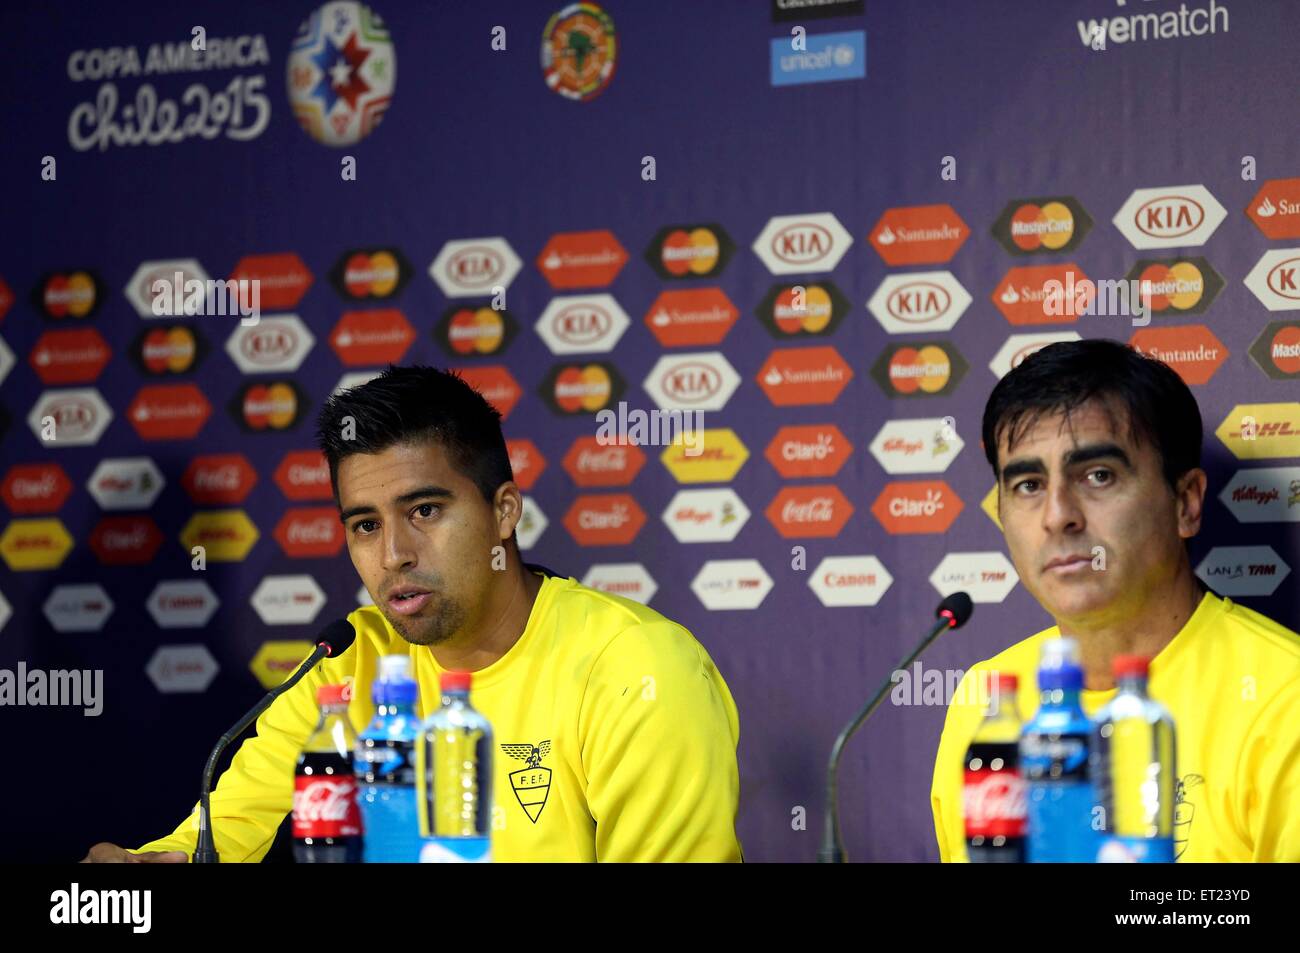 Santiago, Chile. 10th June, 2015. The coach Gustavo Domingo Quinteros (R) and the player Christian Noboa Tello of Ecuador's National Team take part in a press conference prior to the opening game of 2015 Copa America against Chile, in Santiago, Chile, on June 10, 2015. The 2015 Copa America, will be held in Chile from June 11 to July 4. Credit:  Claudio Fanchi/TELAM/Xinhua/Alamy Live News Stock Photo